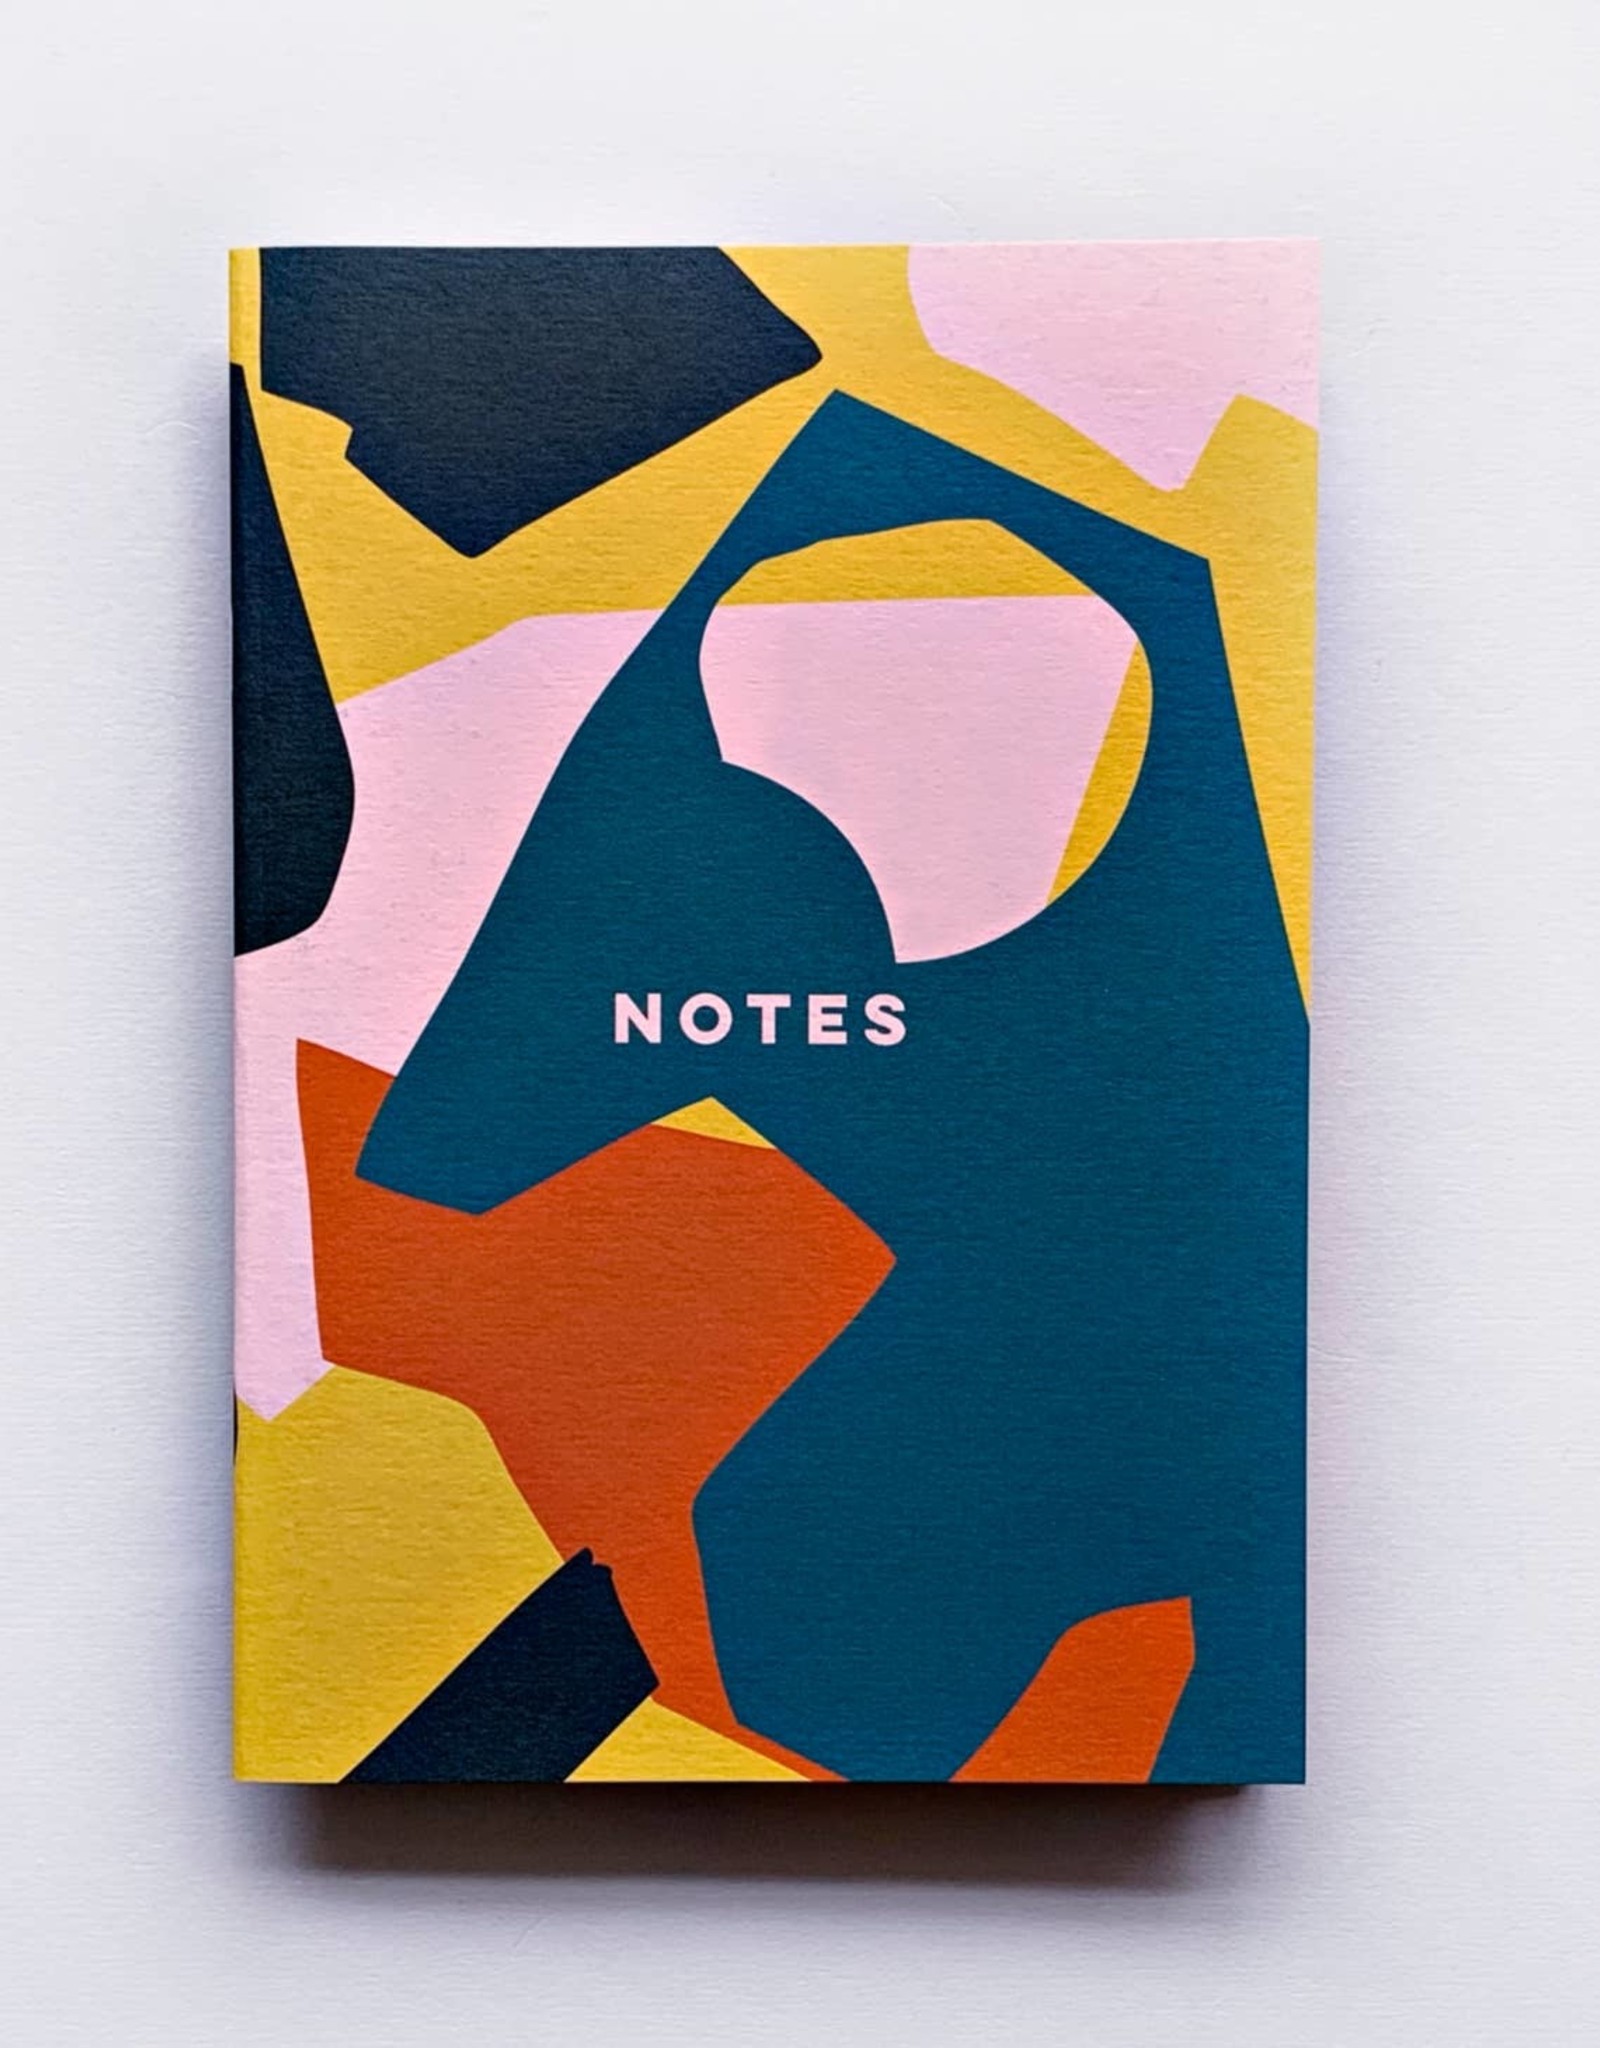 Completist Completist - Cut Out Shapes Notebook Lined